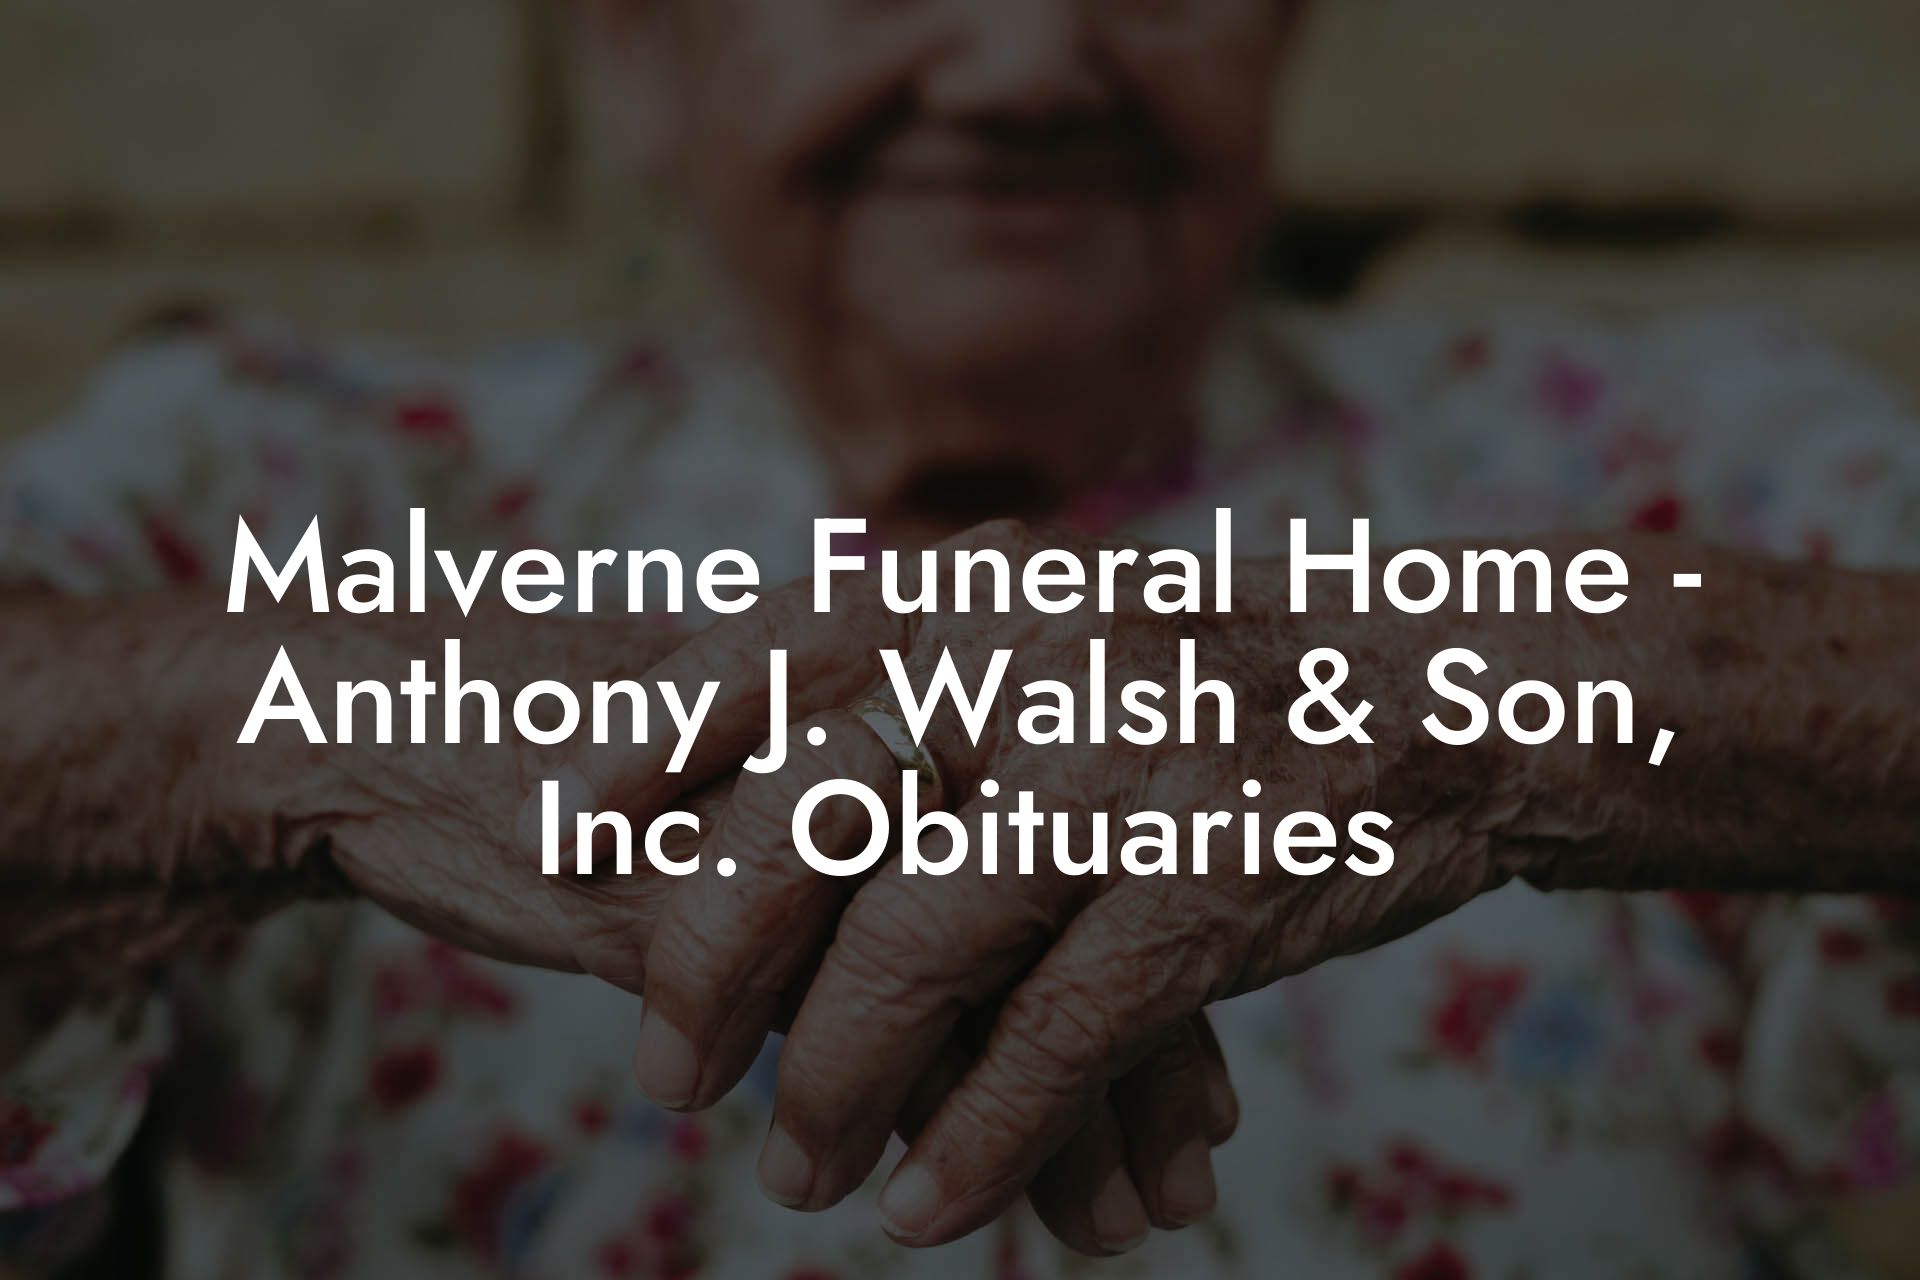 Malverne Funeral Home - Anthony J. Walsh & Son, Inc. Obituaries